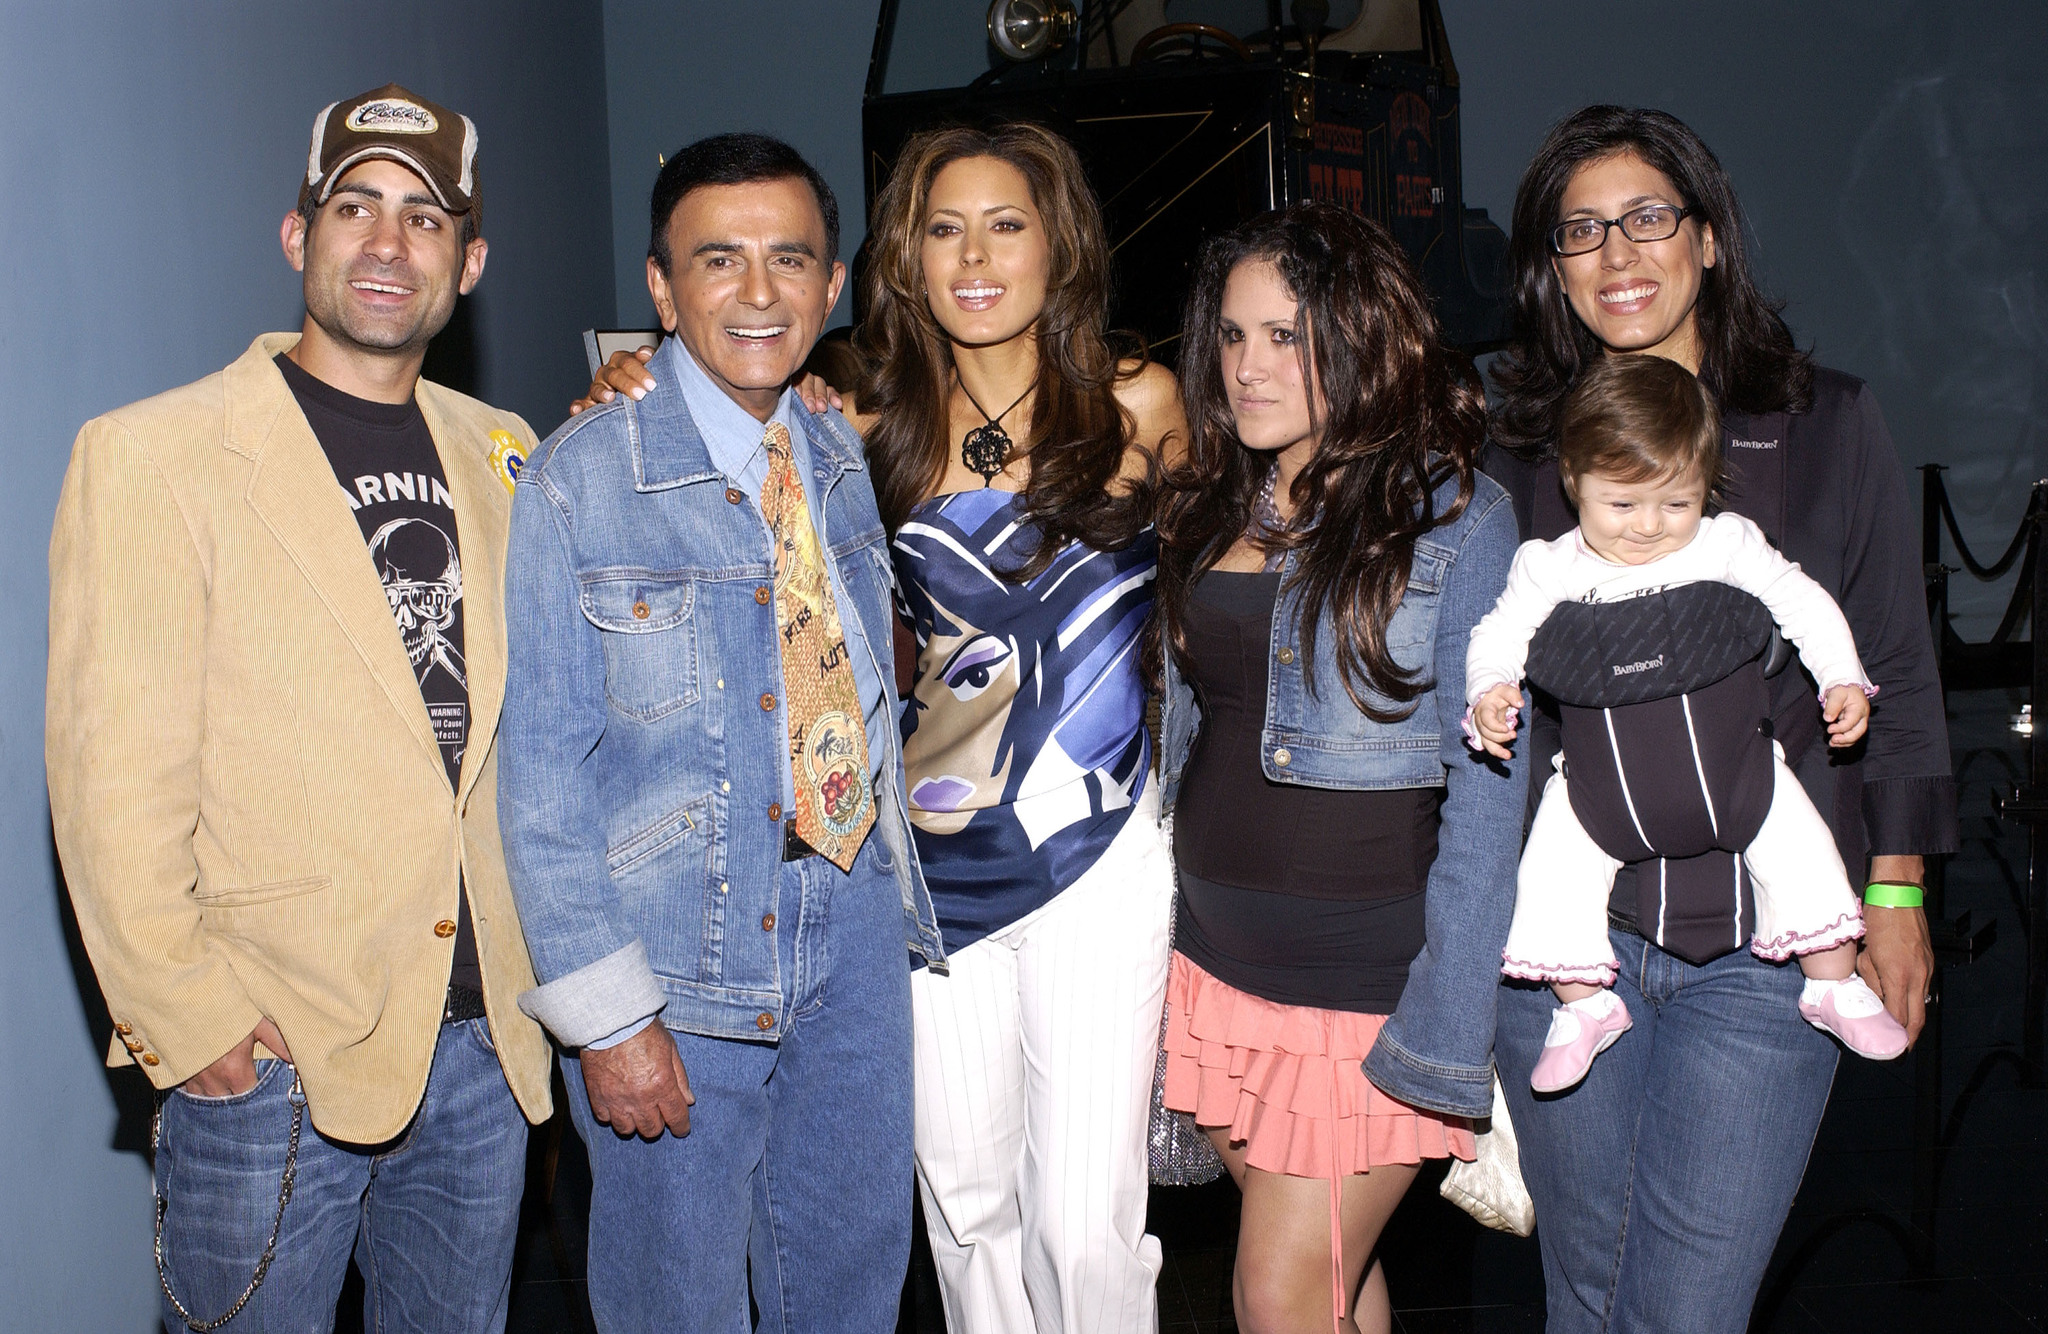 Radio personality Casey Kasem (2nd from left) and his family arrive at the Golden Dads Awards ceremony at the Peterson Automotive Museum on June 15, 2005 in Los Angeles, California.